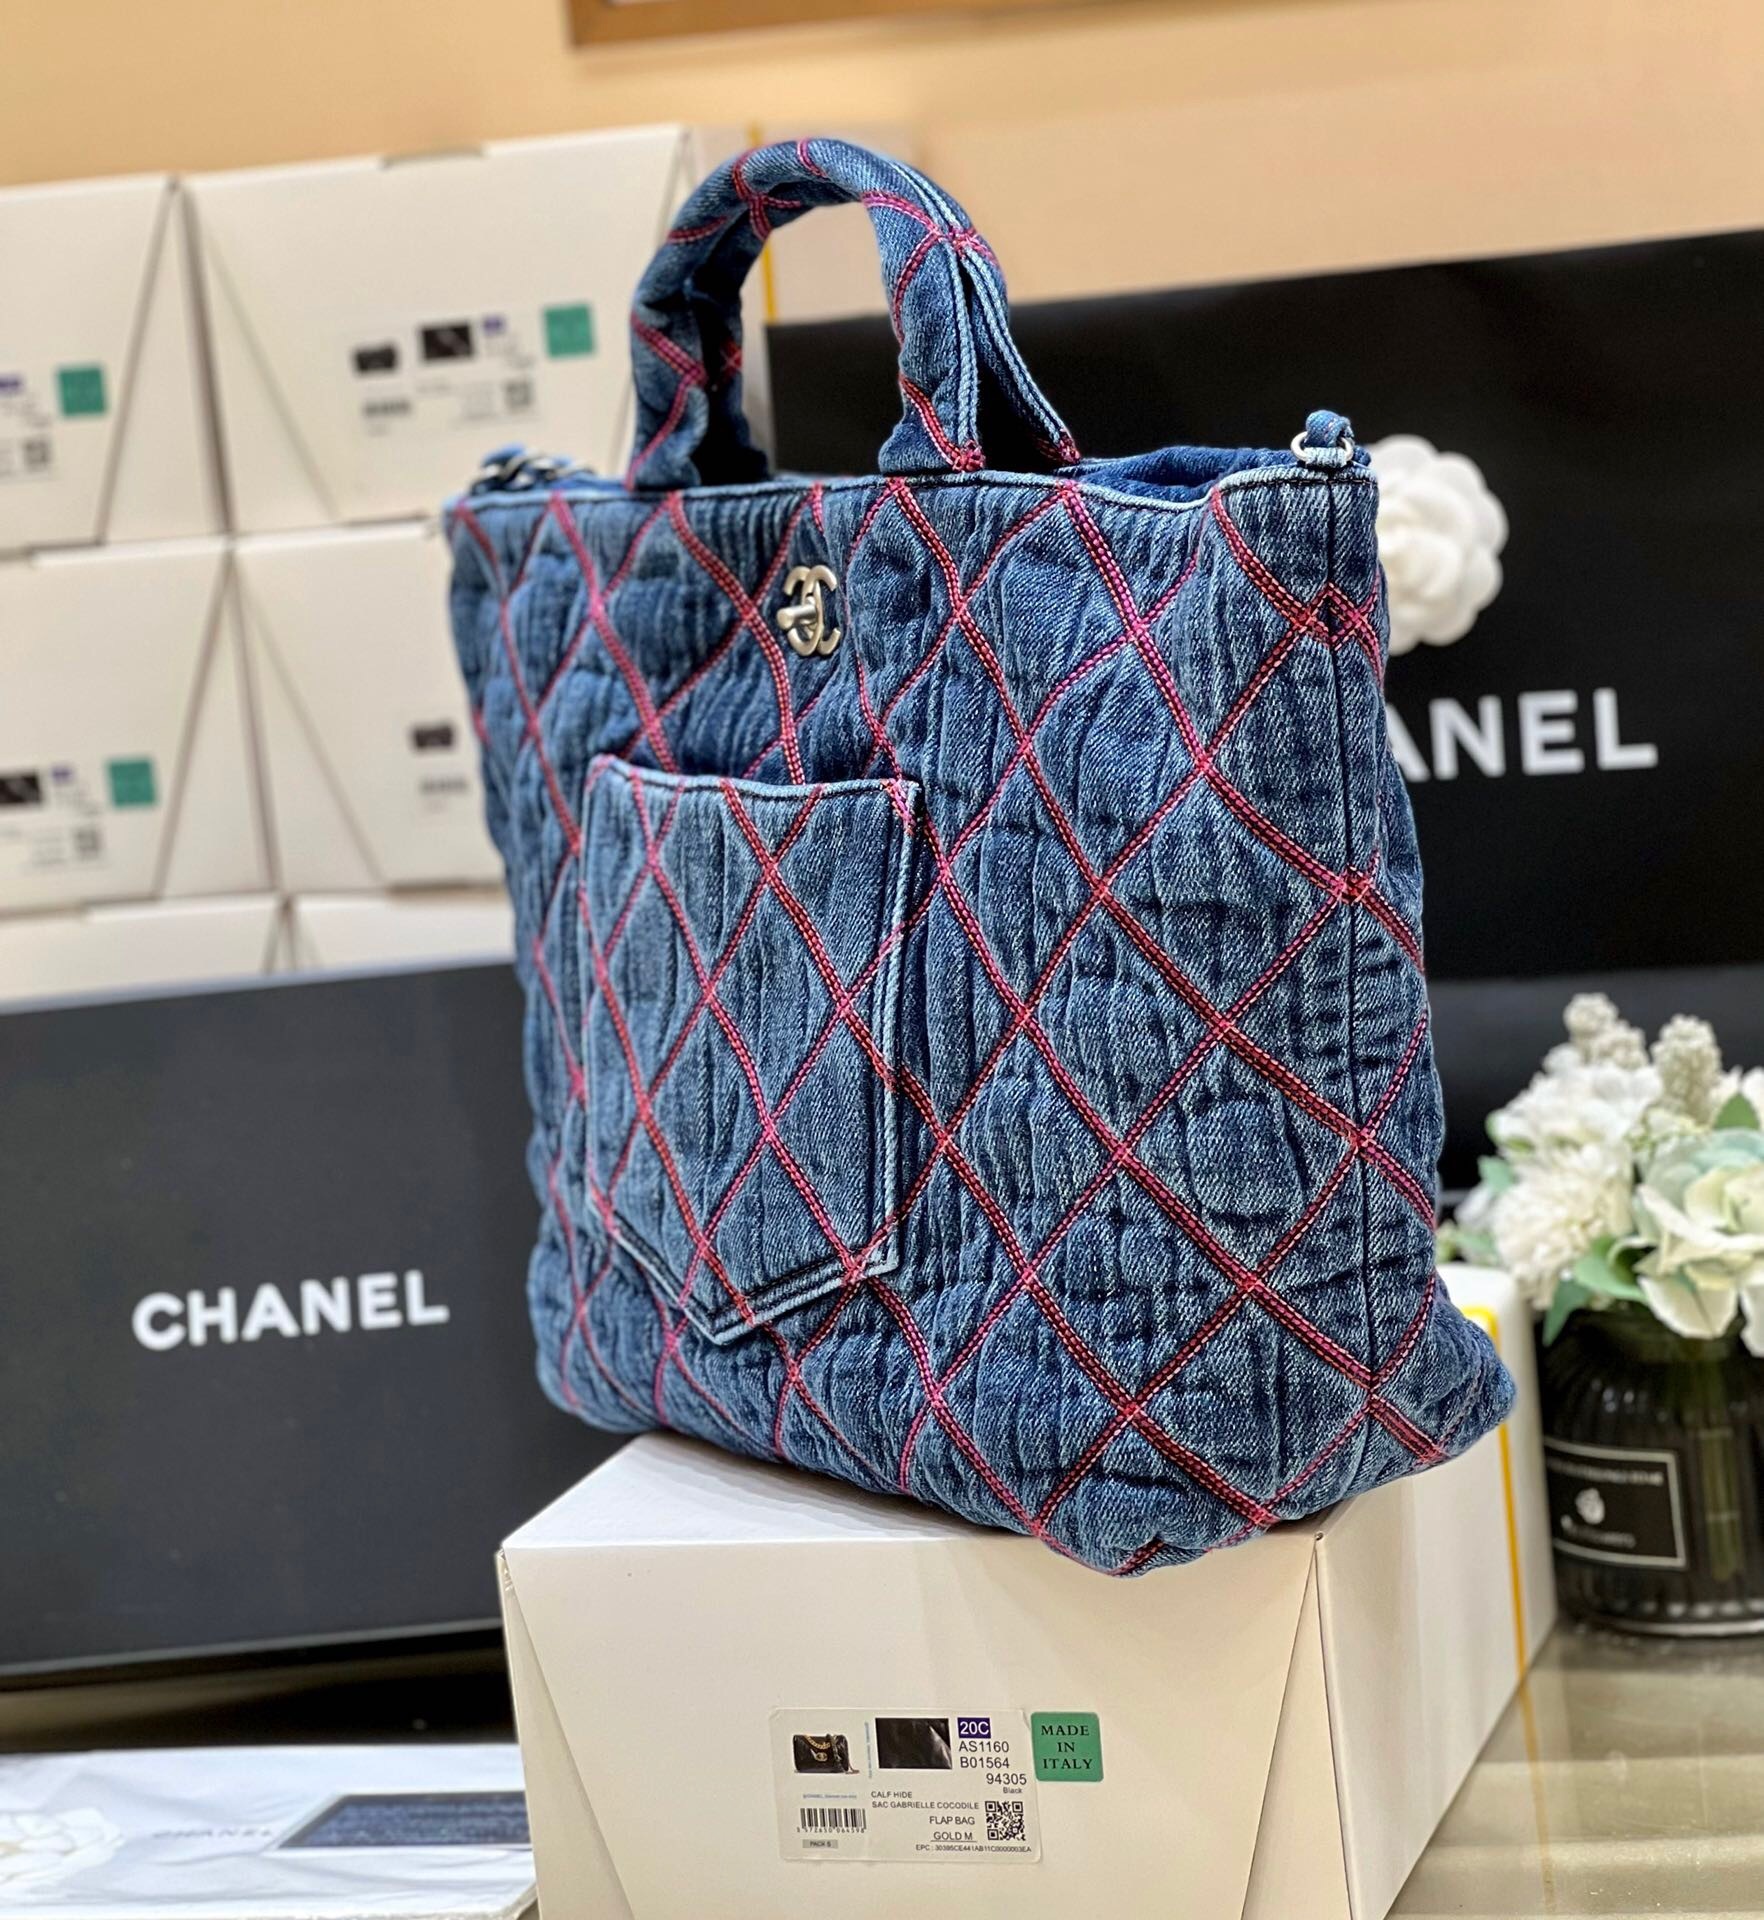 Date Code & Stamp] Chanel Coco Cabas Bag XL Giant Blue Denim Tote